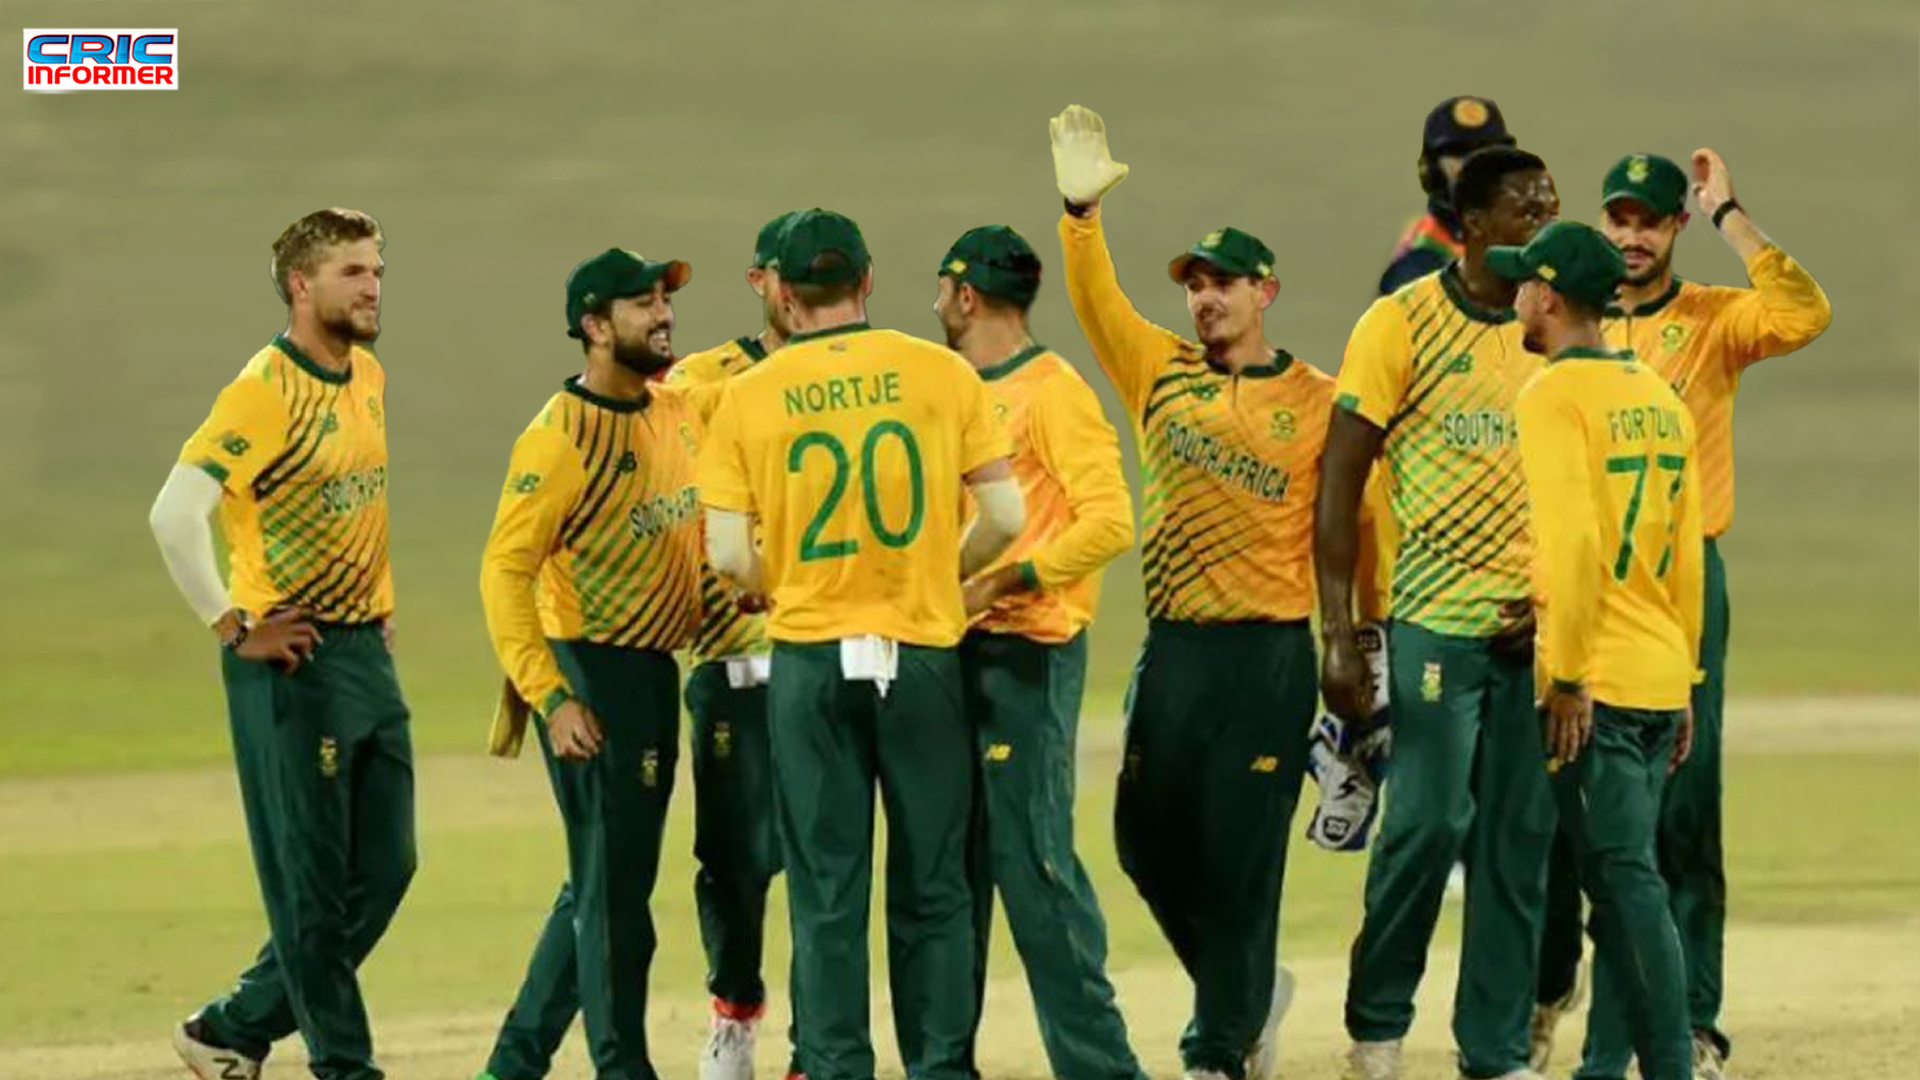 South Africa unveil new jersey ahead of ODI World Cup